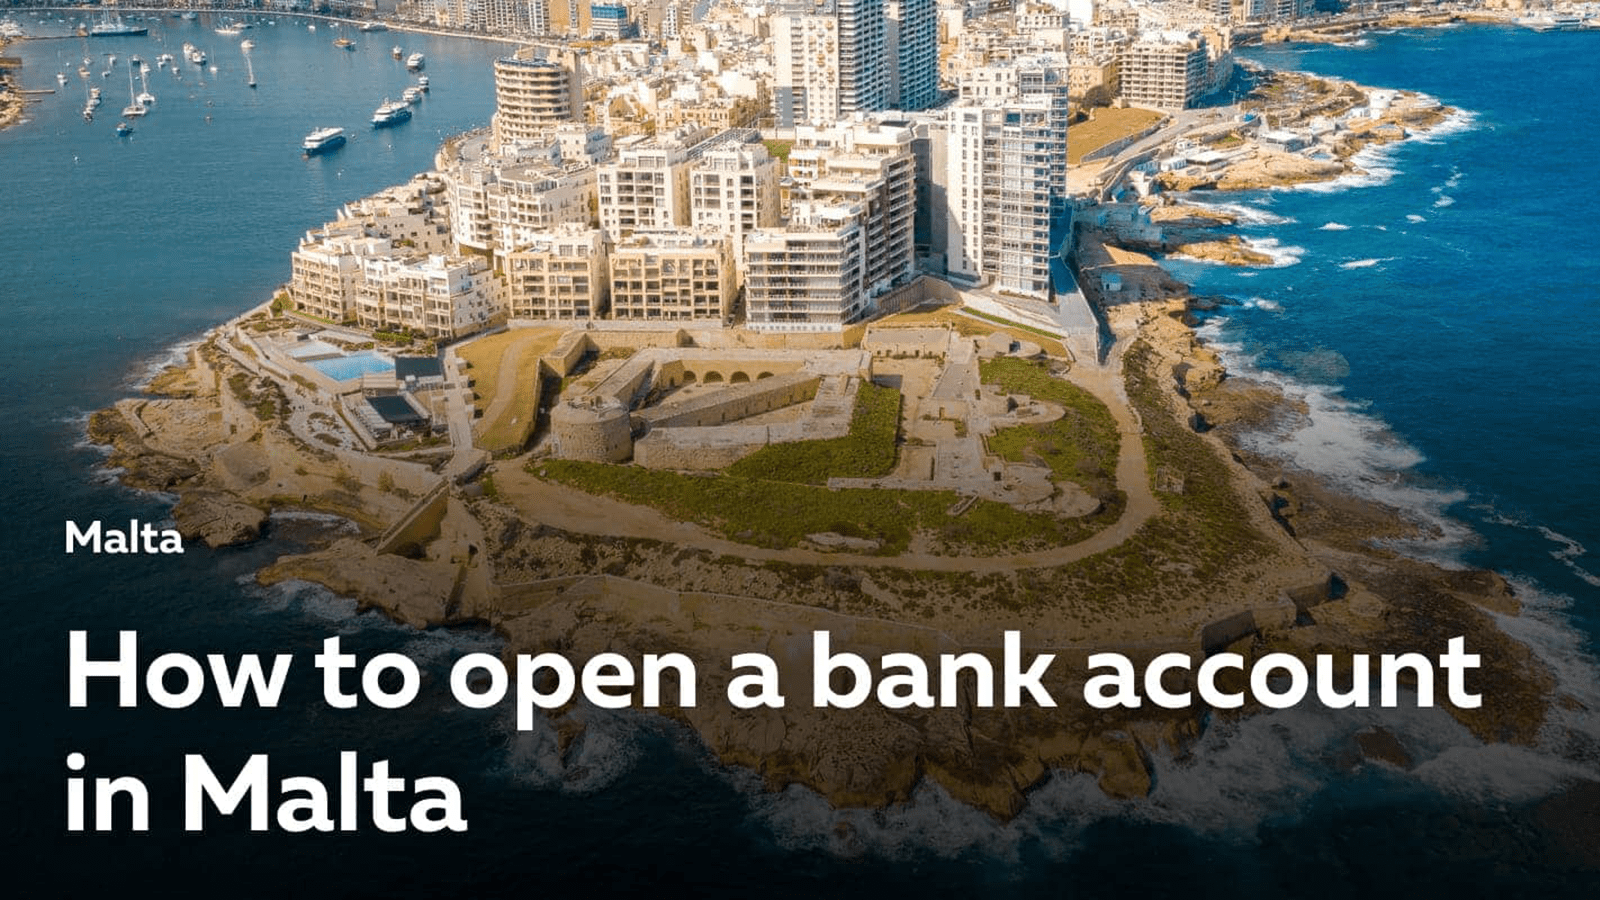 How to Open a Bank Account in Malta